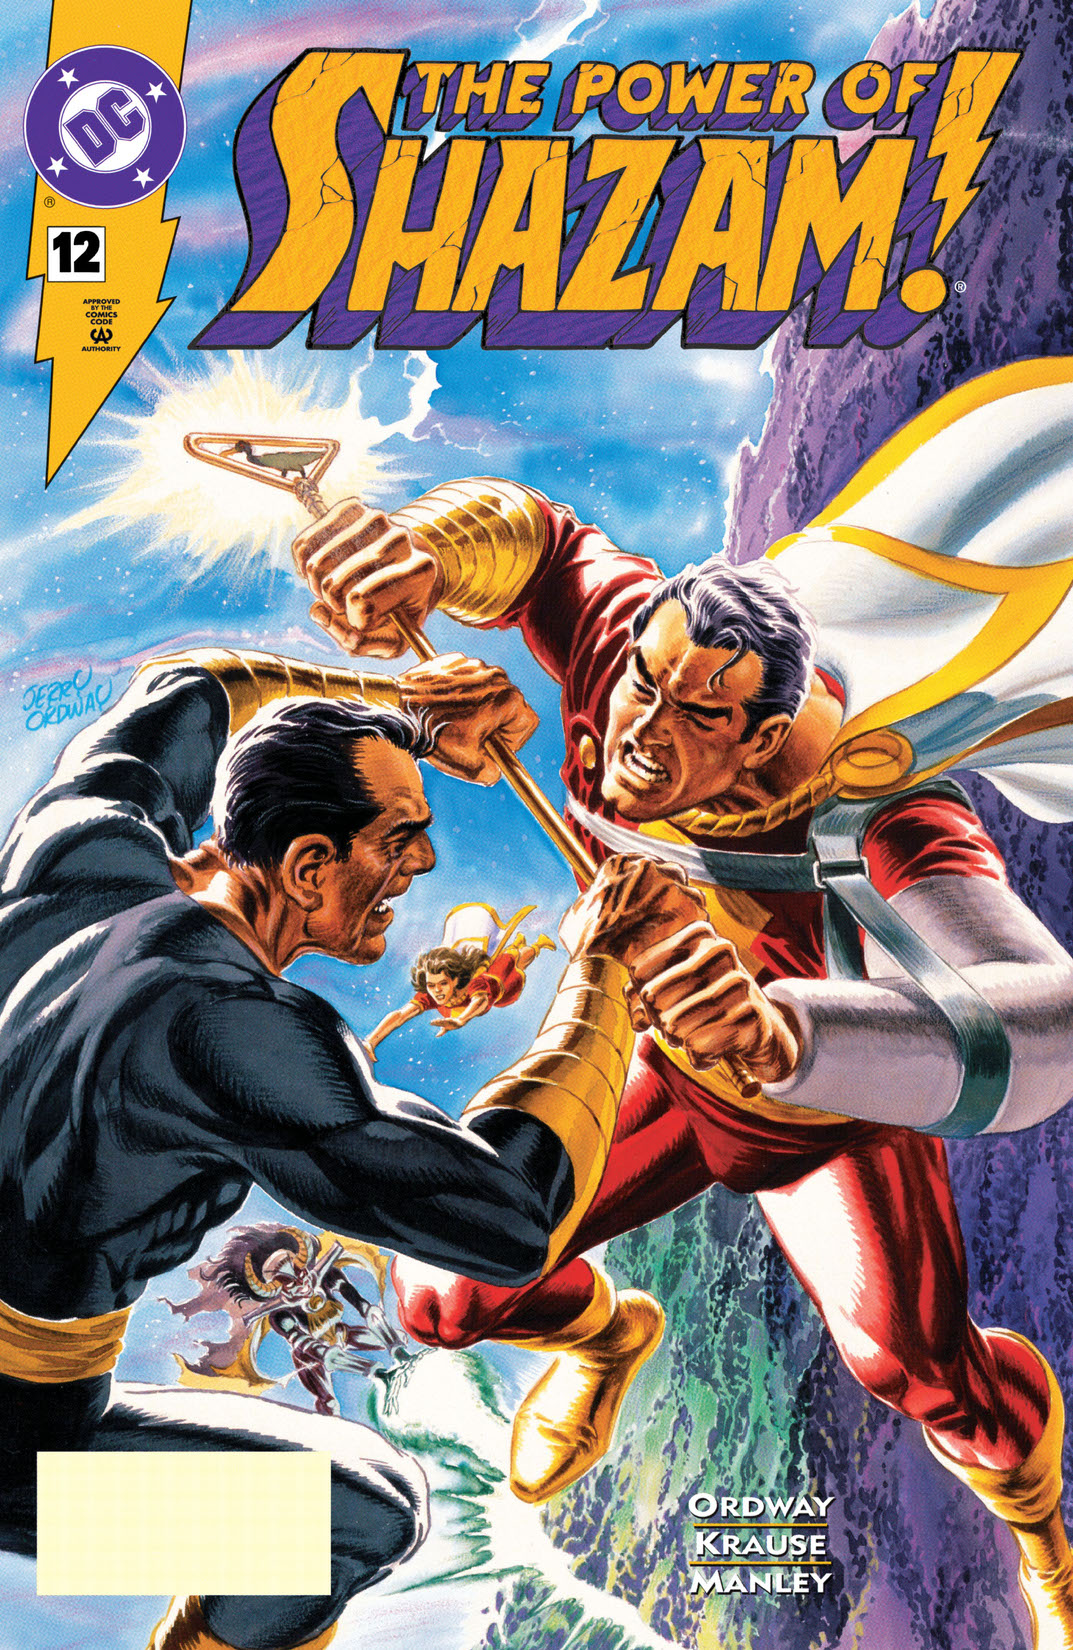 The Power of Shazam! #12 preview images